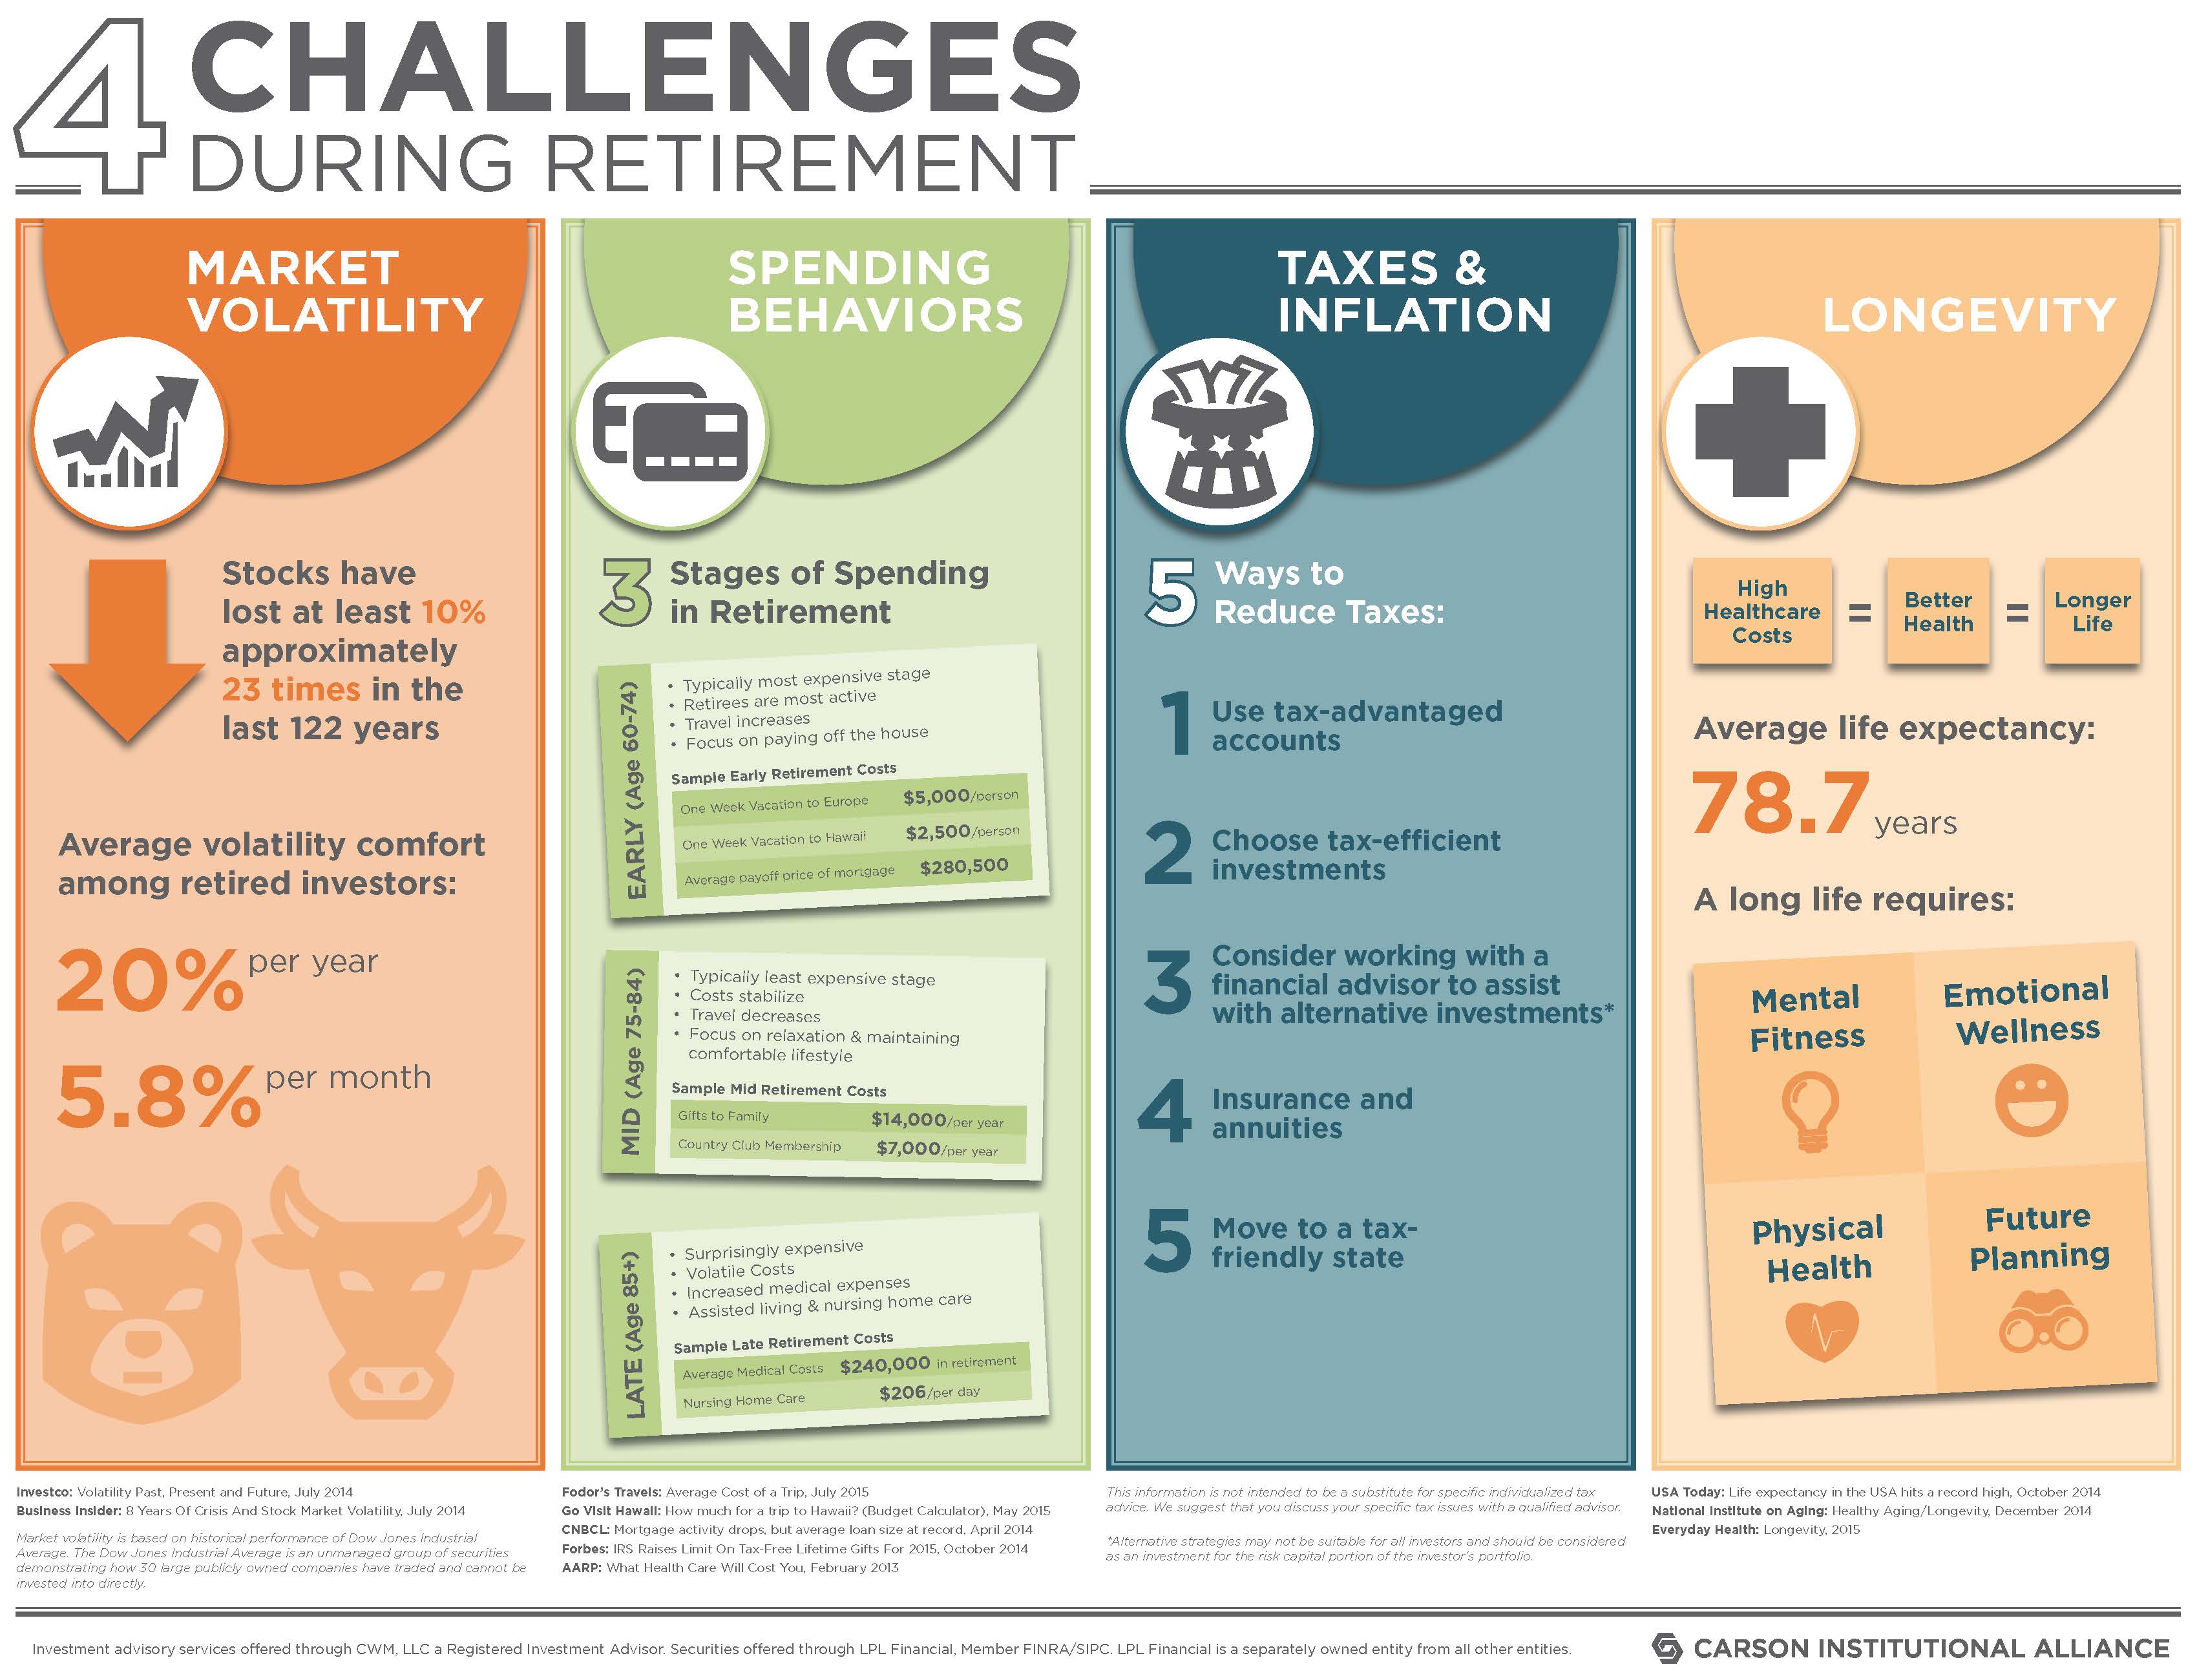 4 Challenges During Retirement Infographic